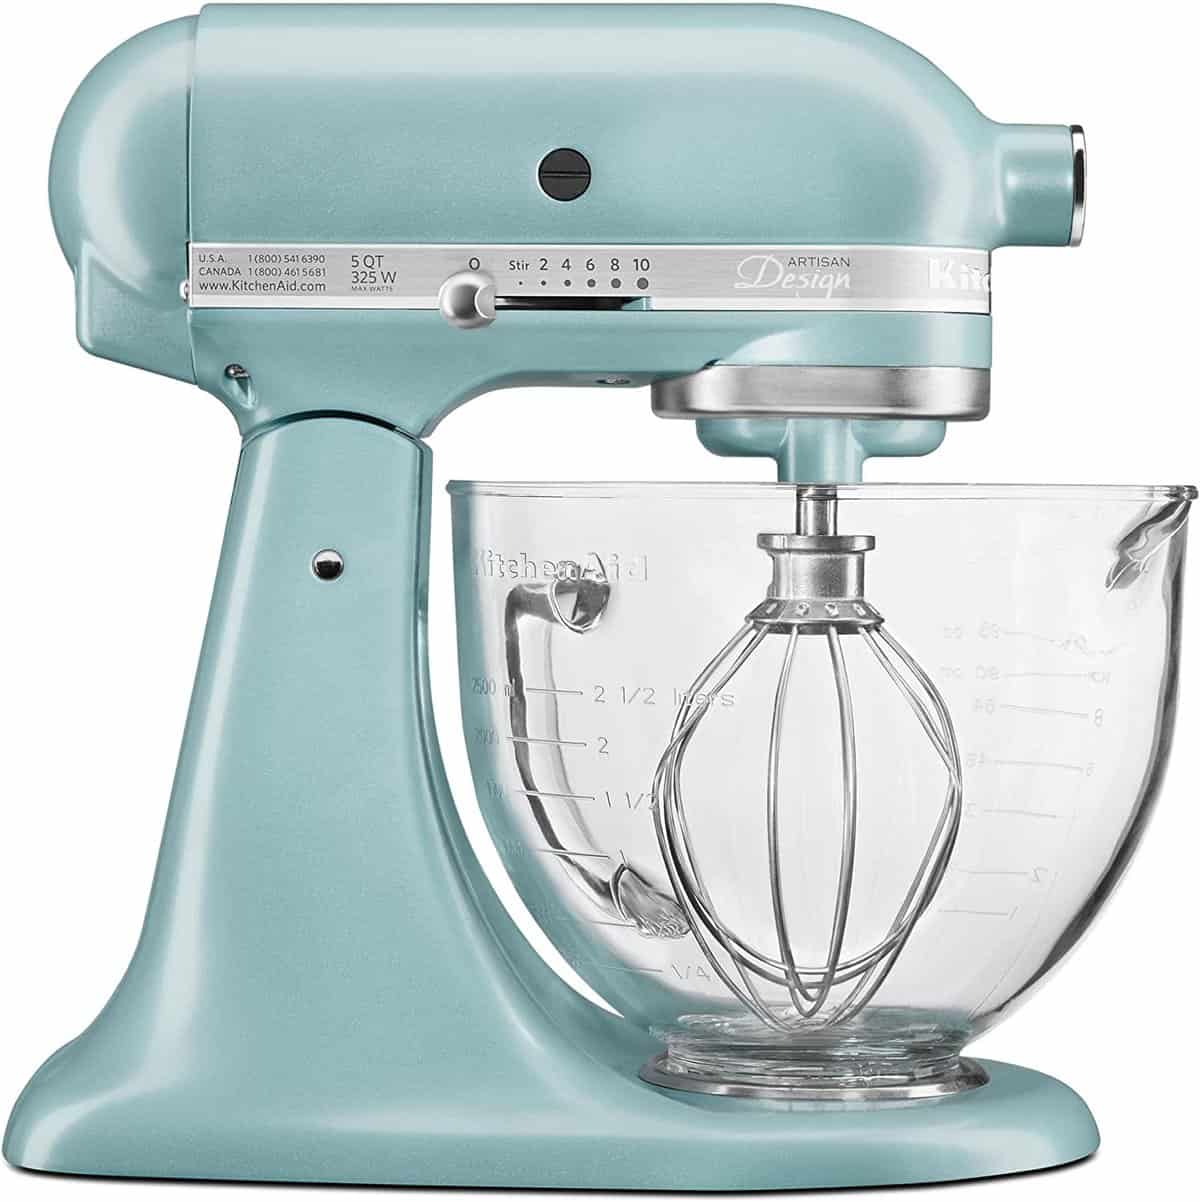 A Kitchenaid standing mixer with a glass bowl.